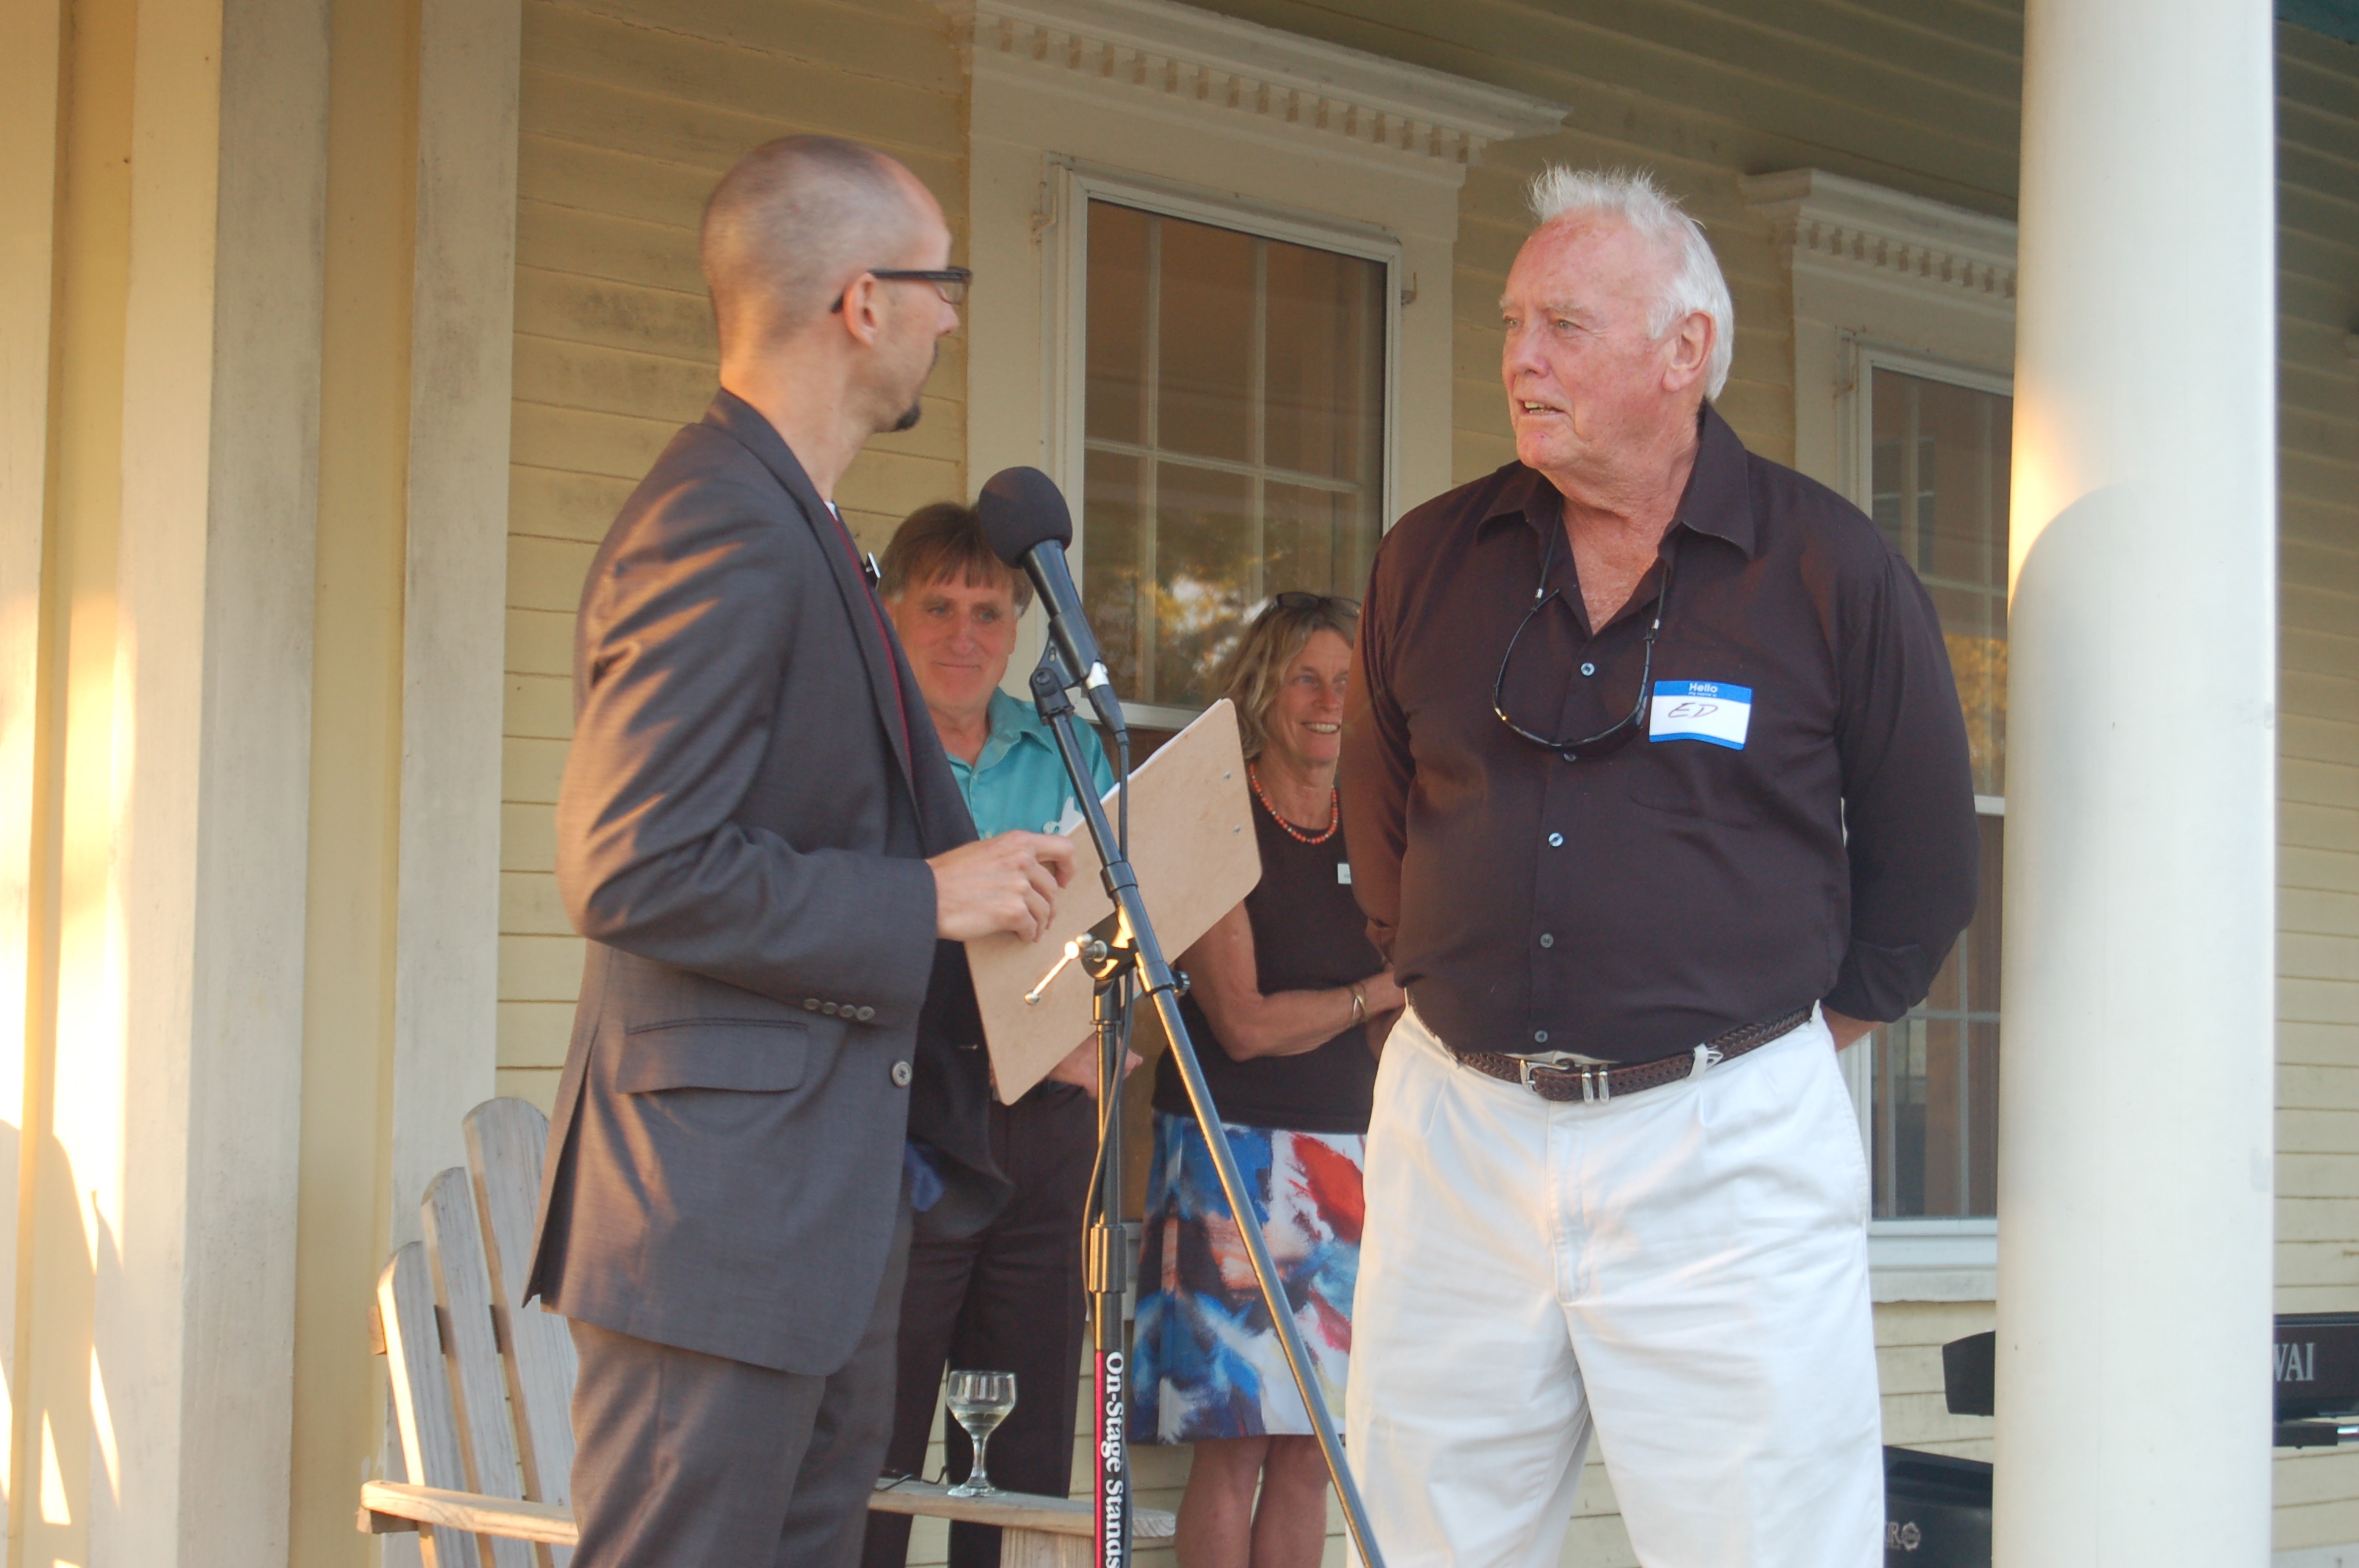 Ed Bellegarde (right) accepts a Volunteer Extraordinaire award from Nik Charov, president of Laudholm Trust, at the 2014 volunteer recognition event. [Two men in the foreground, a man and woman in the background, on a large porch.]